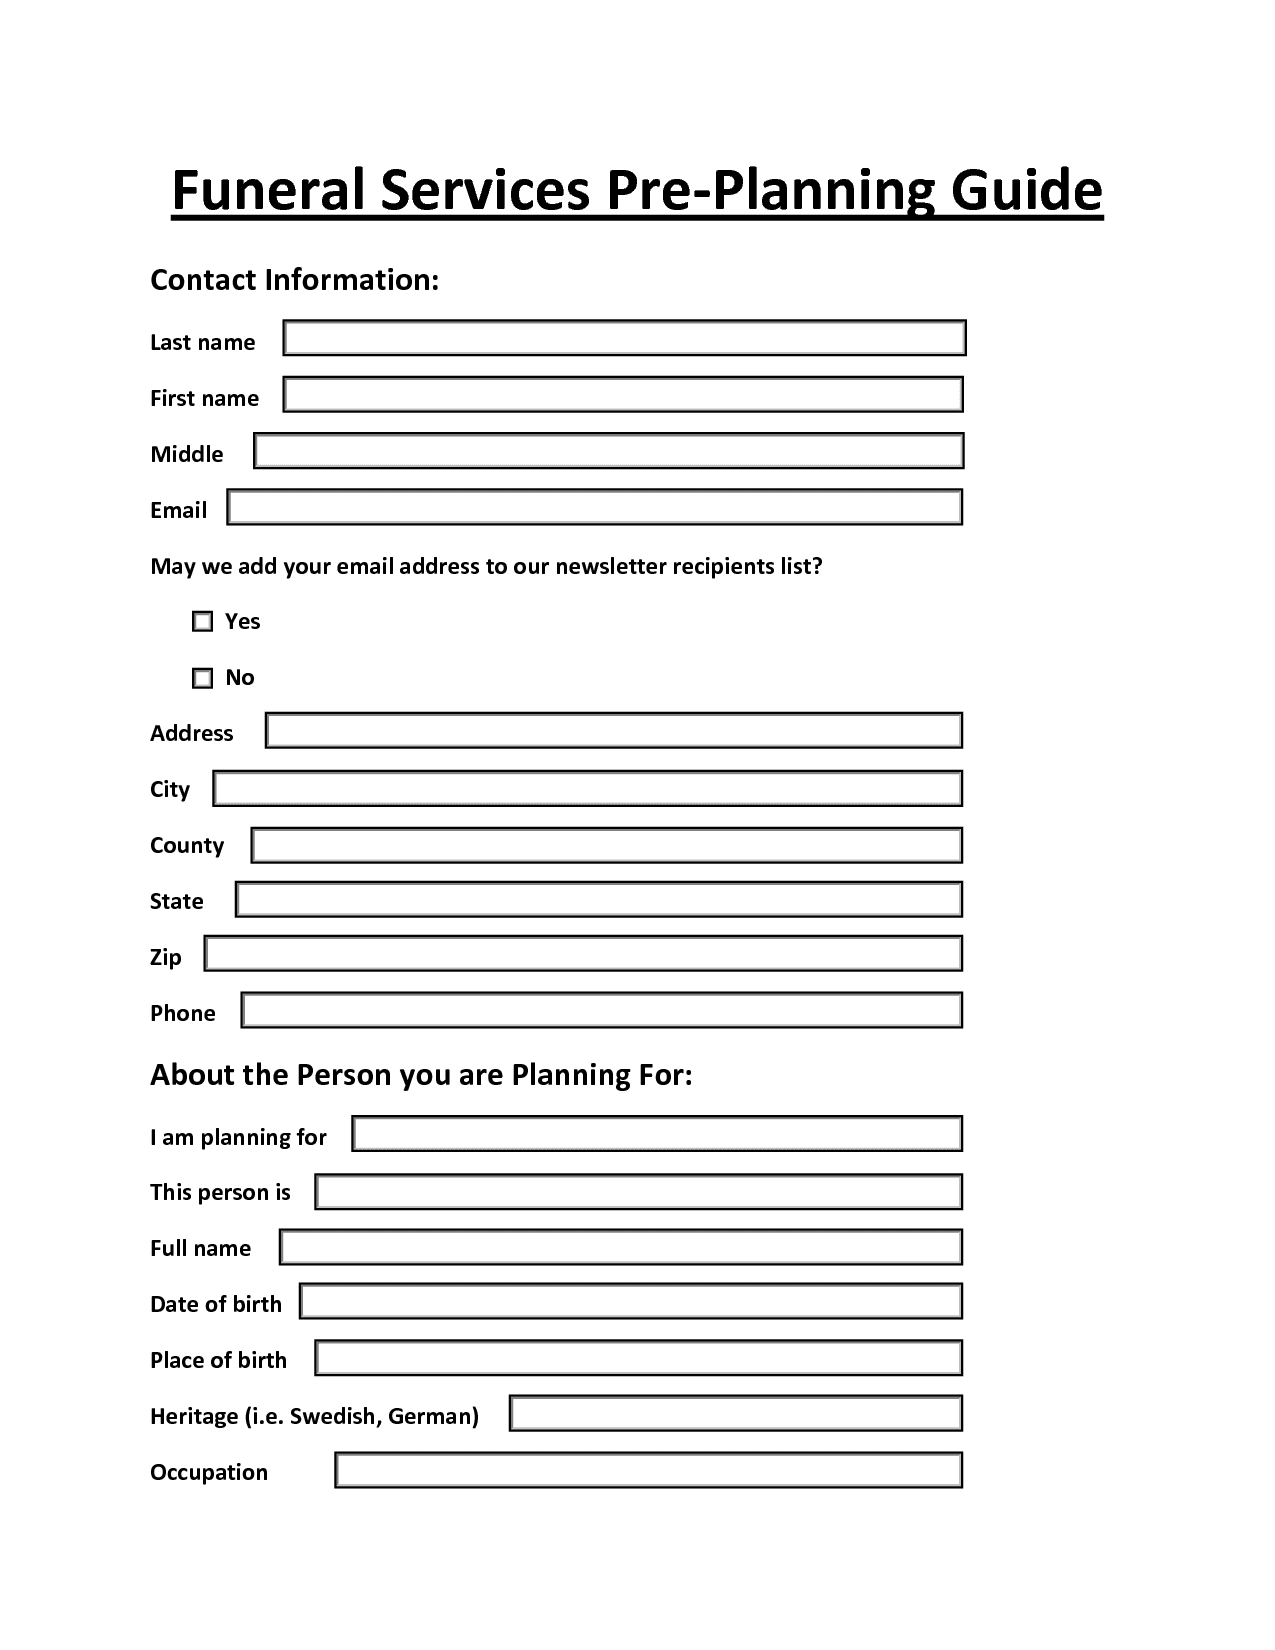 Funeral Pre Planning Checklist And Funeral Planning Guide Printable Form